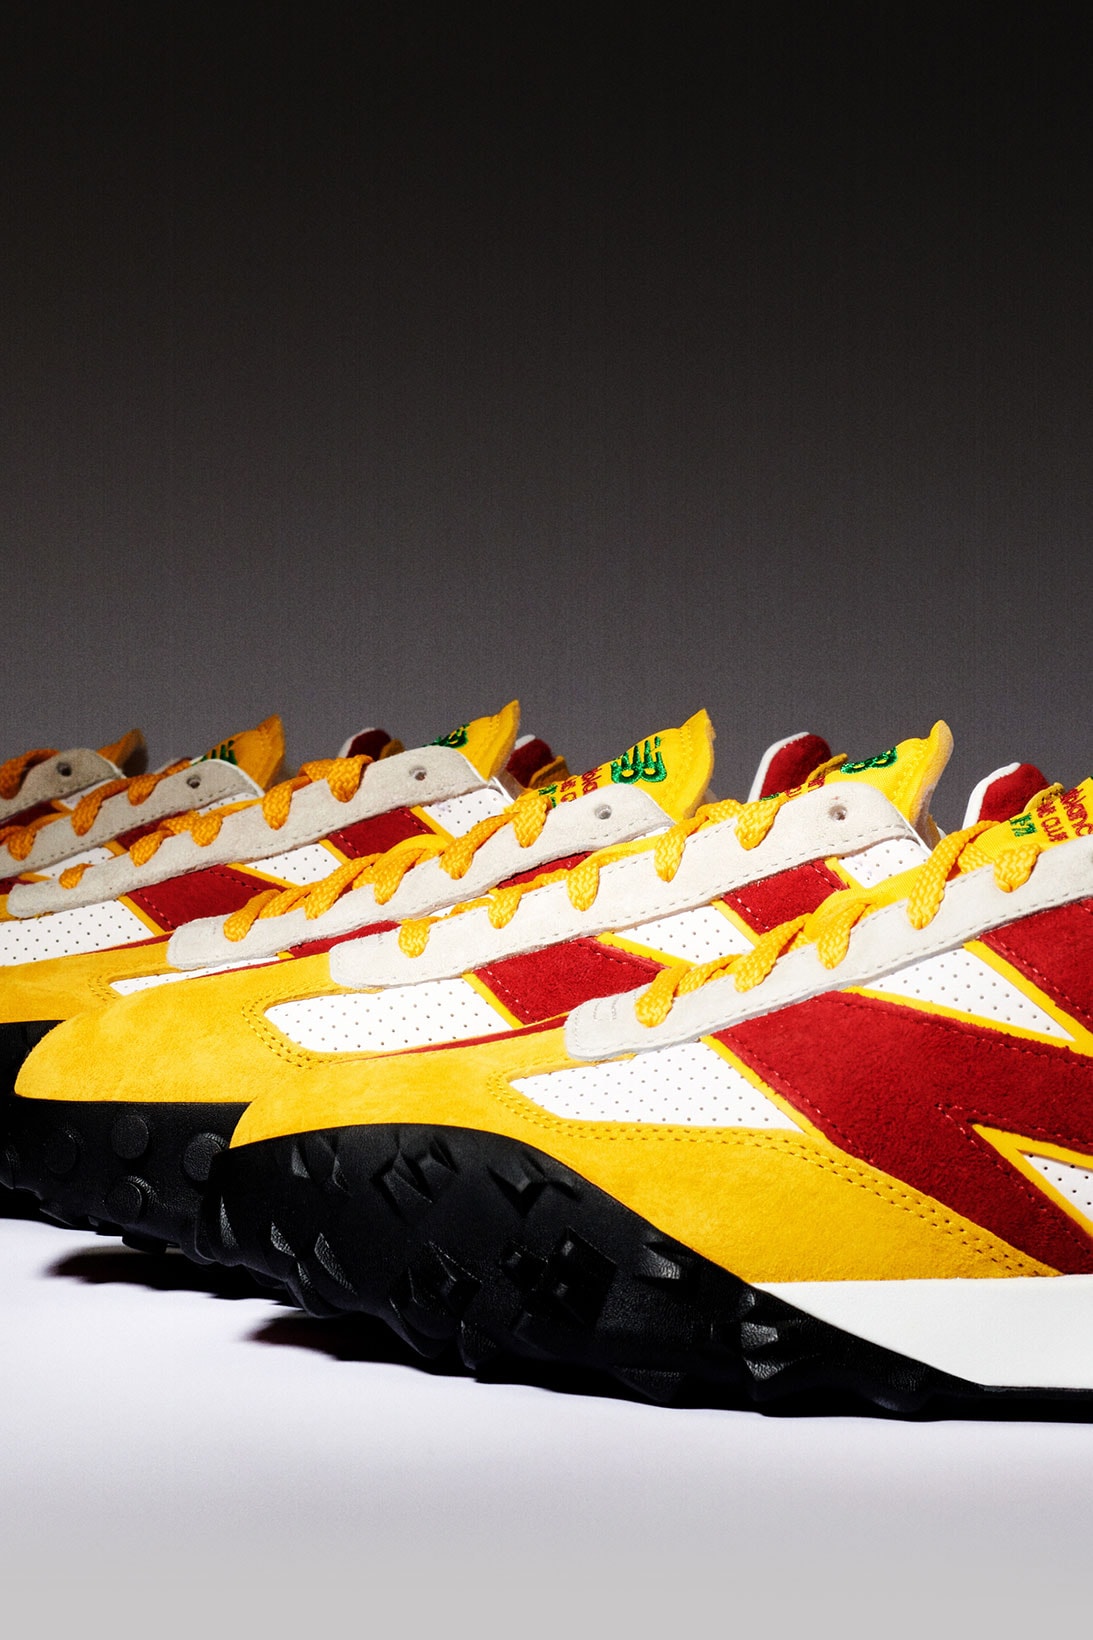 Casablanca New Balance NB XC-72 Sneakers Collaboration Yellow Red White